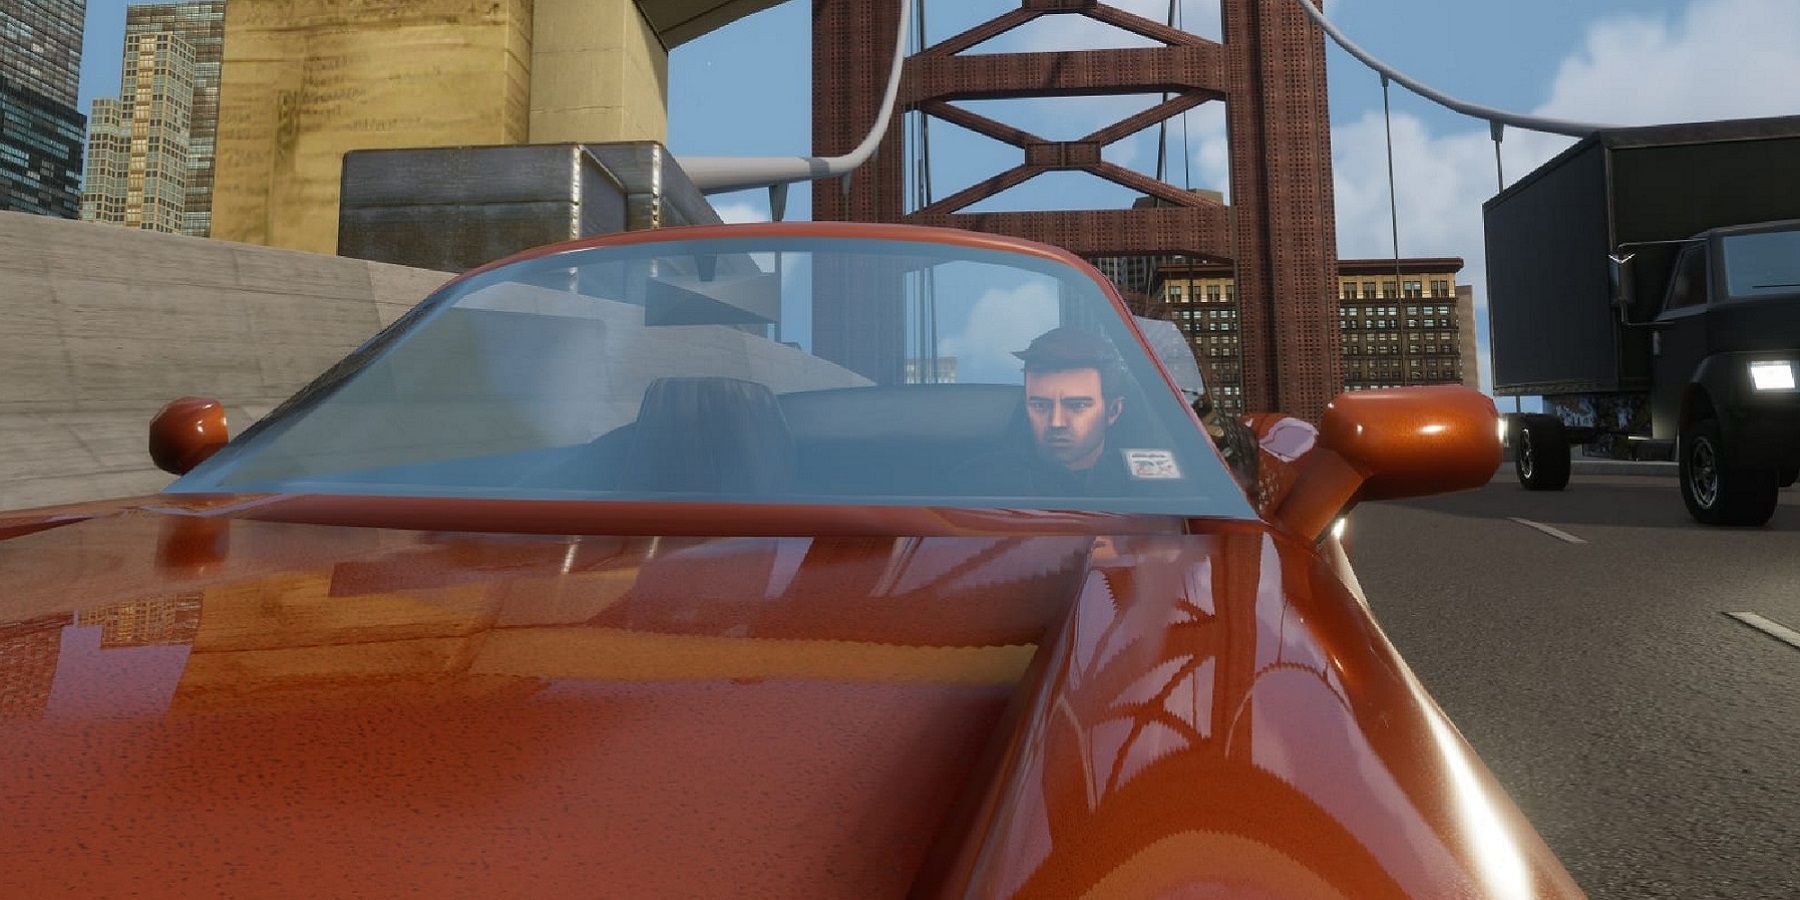 Screenshot from Grand Theft Auto 3 with Claude driving a red sports car.